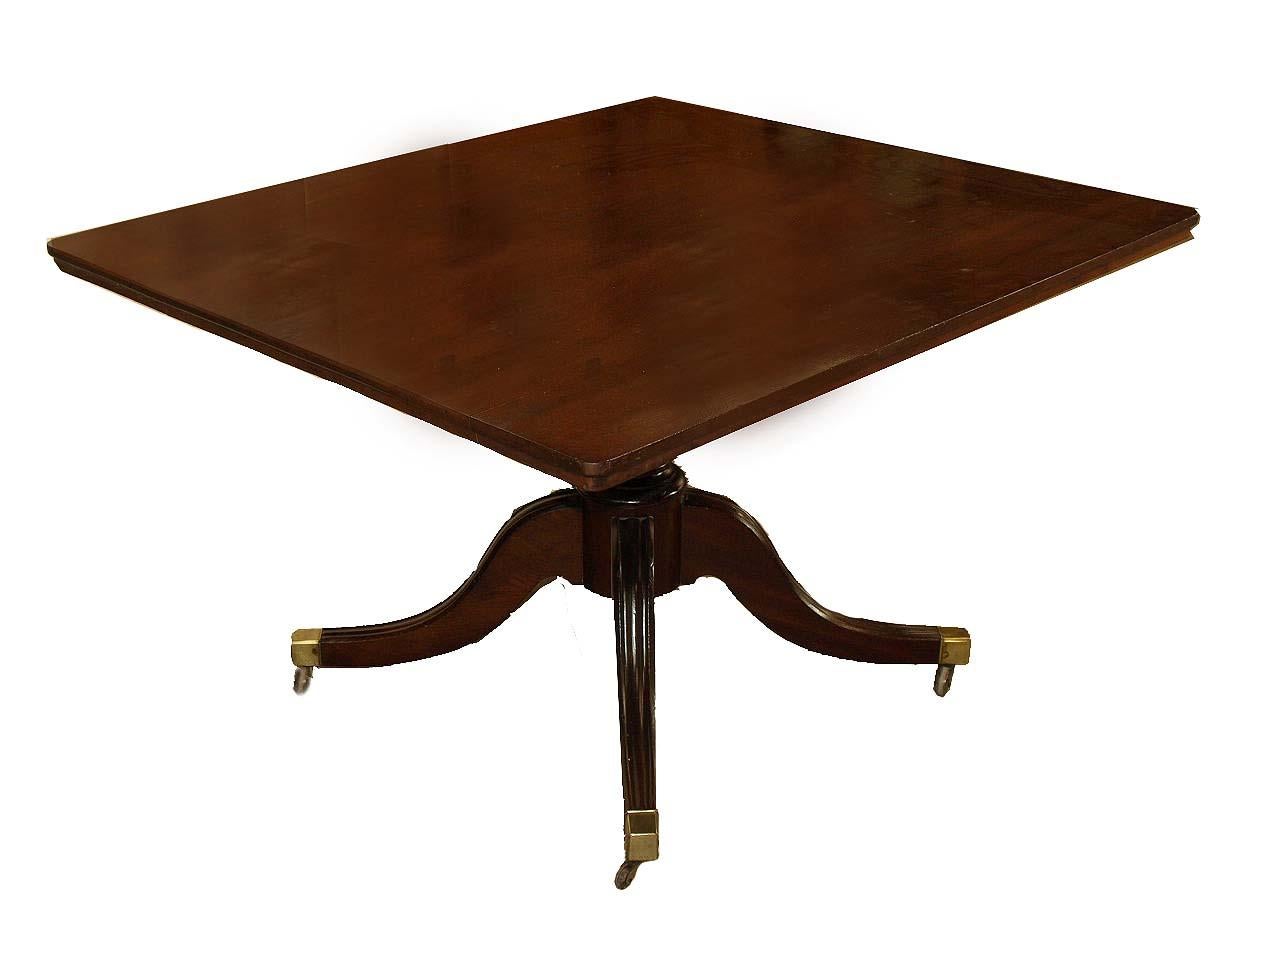 English Sheraton mahogany tilt top breakfast table, the top with beautiful grain supported by a band of mahogany underneath the perimeter; base with boldly turned shaft above the four legs with molded top edge, terminating with plain brass castors. 